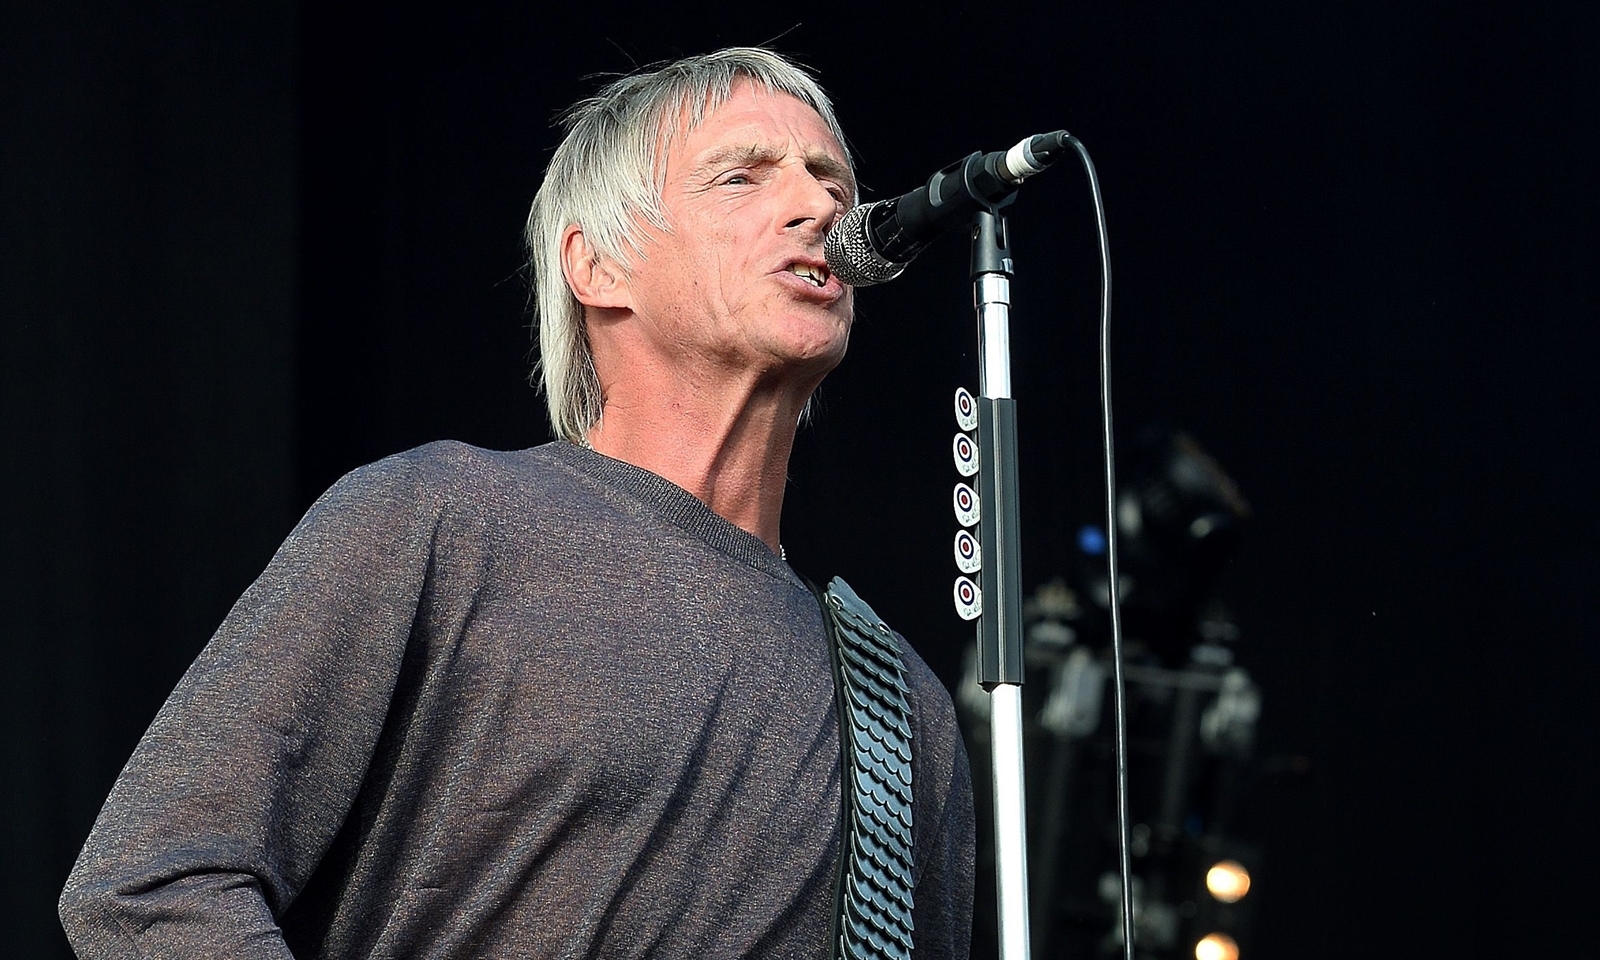 Paul Weller performs on stage at the Hard Rock calling music festival at Queen Elizabeth Olympic Park in Stratford east London.